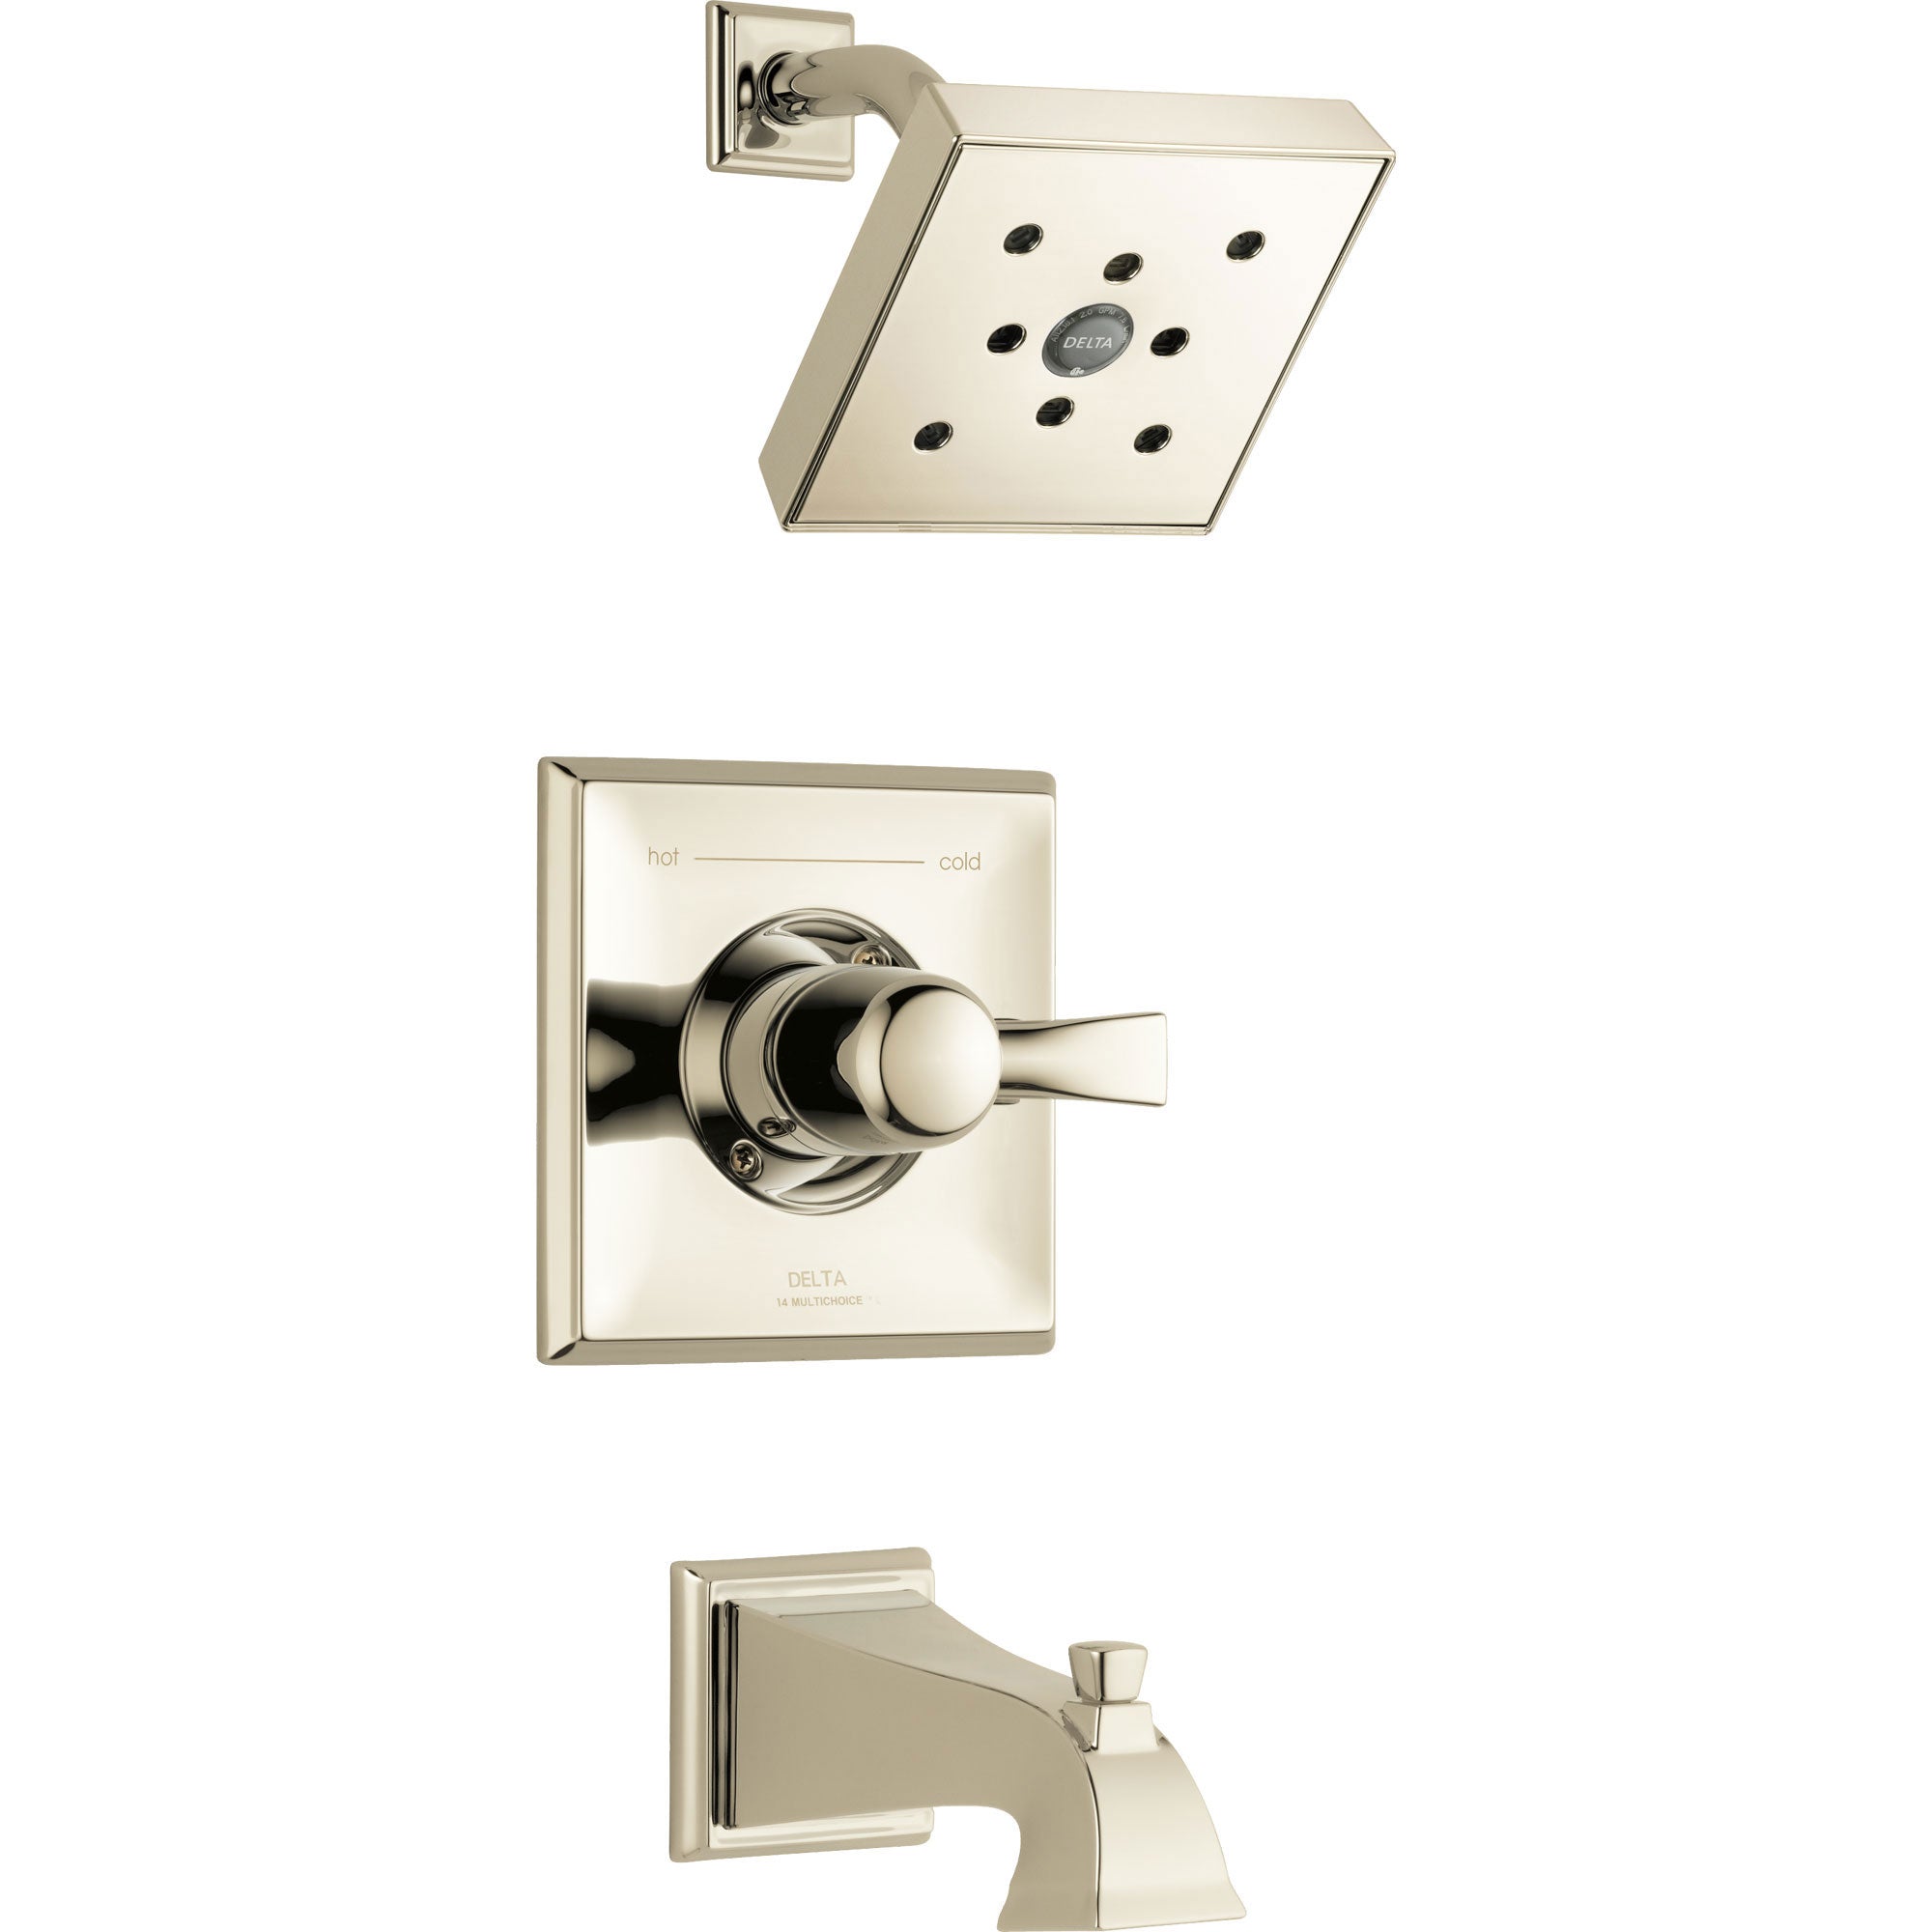 Delta Dryden Modern Square 14 Series H2Okinetic Polished Nickel Finish Single Handle Tub and Shower Combination Faucet INCLUDES Rough-in Valve D1208V